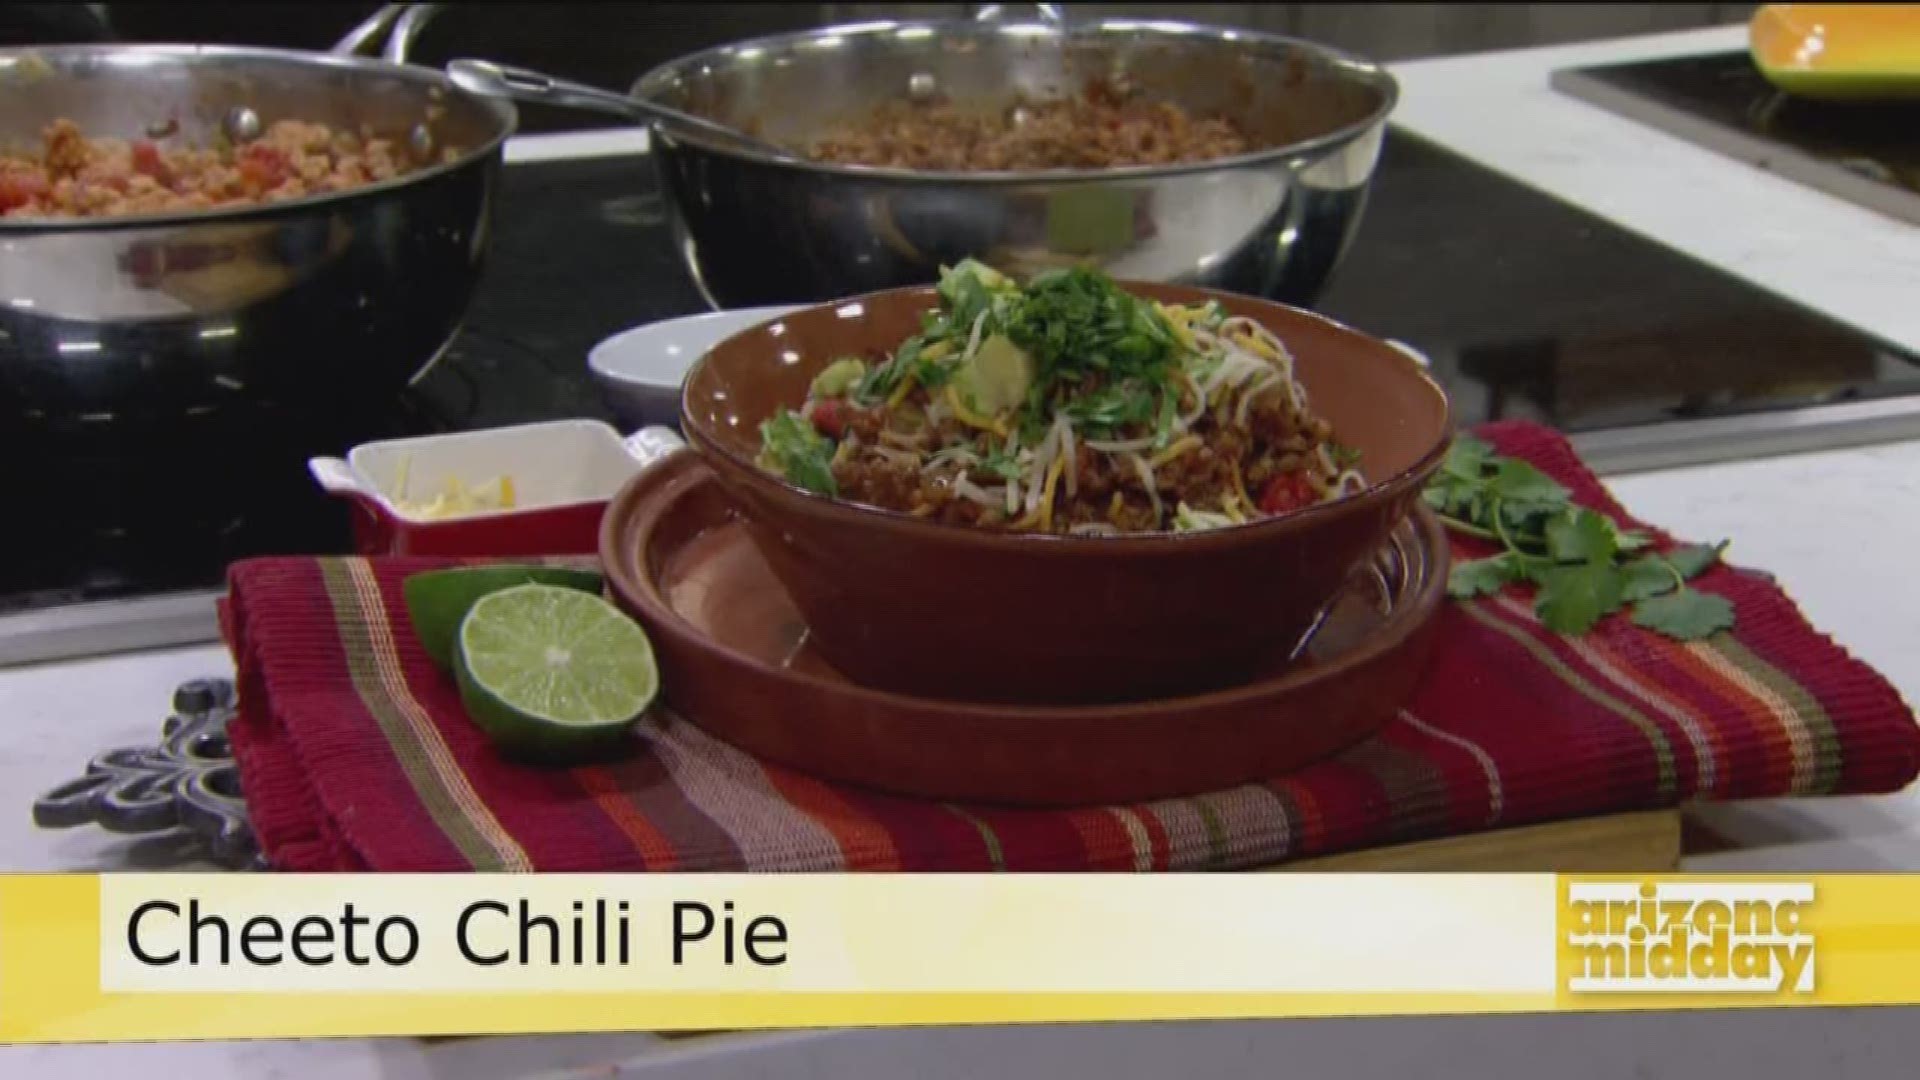 Jan is back in the kitchen showing us how to make chili with a twist